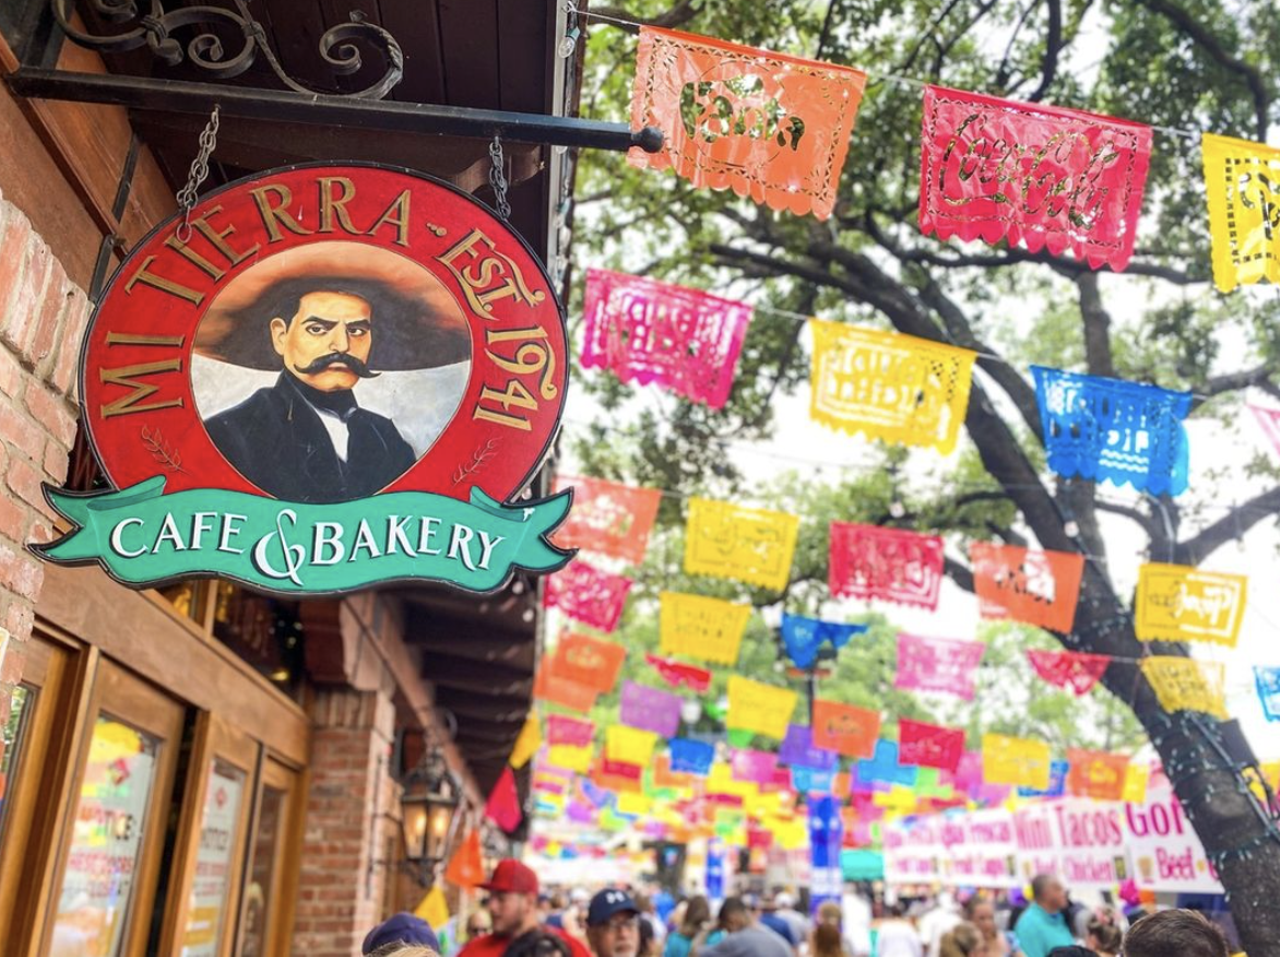 Taking all of your out-of-town visitors to Mi Tierra
Is there anything wrong with Mi Tierra? No. It's a San Antonio institution, and we've got to admit the surroundings are sensational. But there are plenty of other great Tex-Mex spots in this city. Spread the love around a little bit when you're entertaining guests.
Photo via Instagram / mitierracafesa